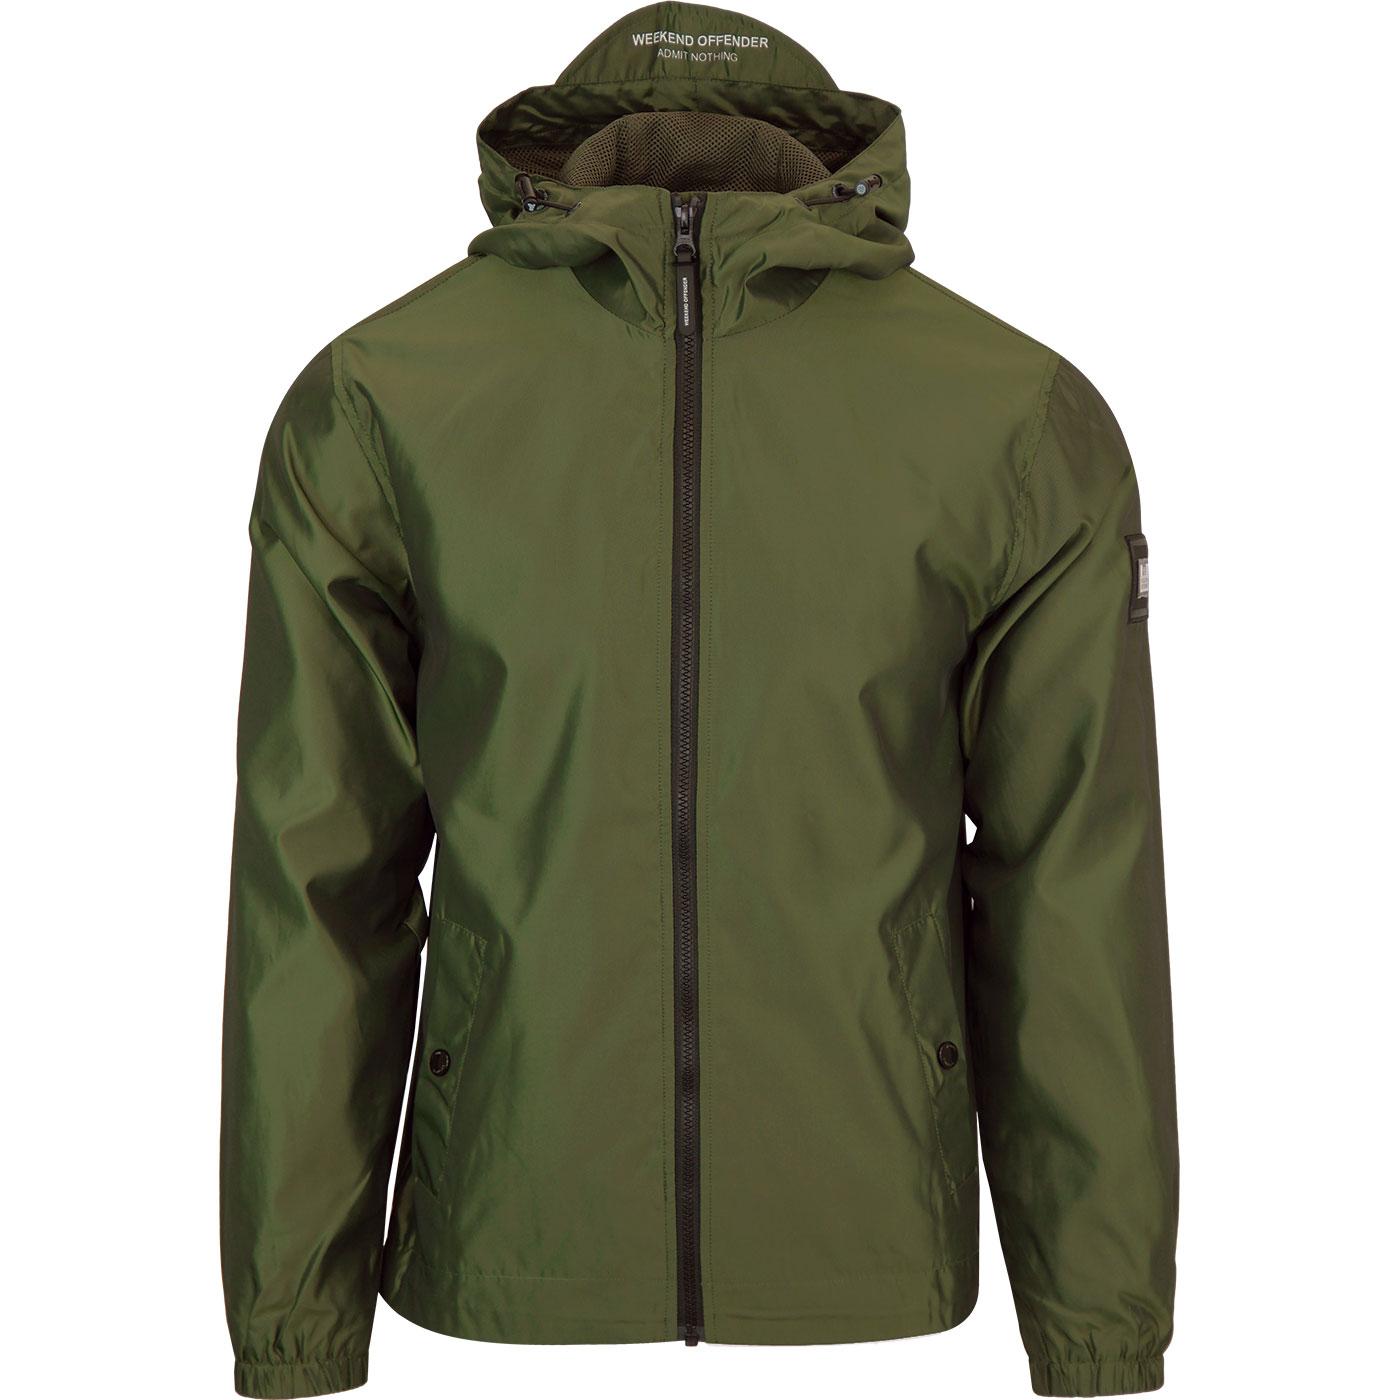 Armstrong WEEKEND OFFENDER 90s Hooded Jacket MOSS